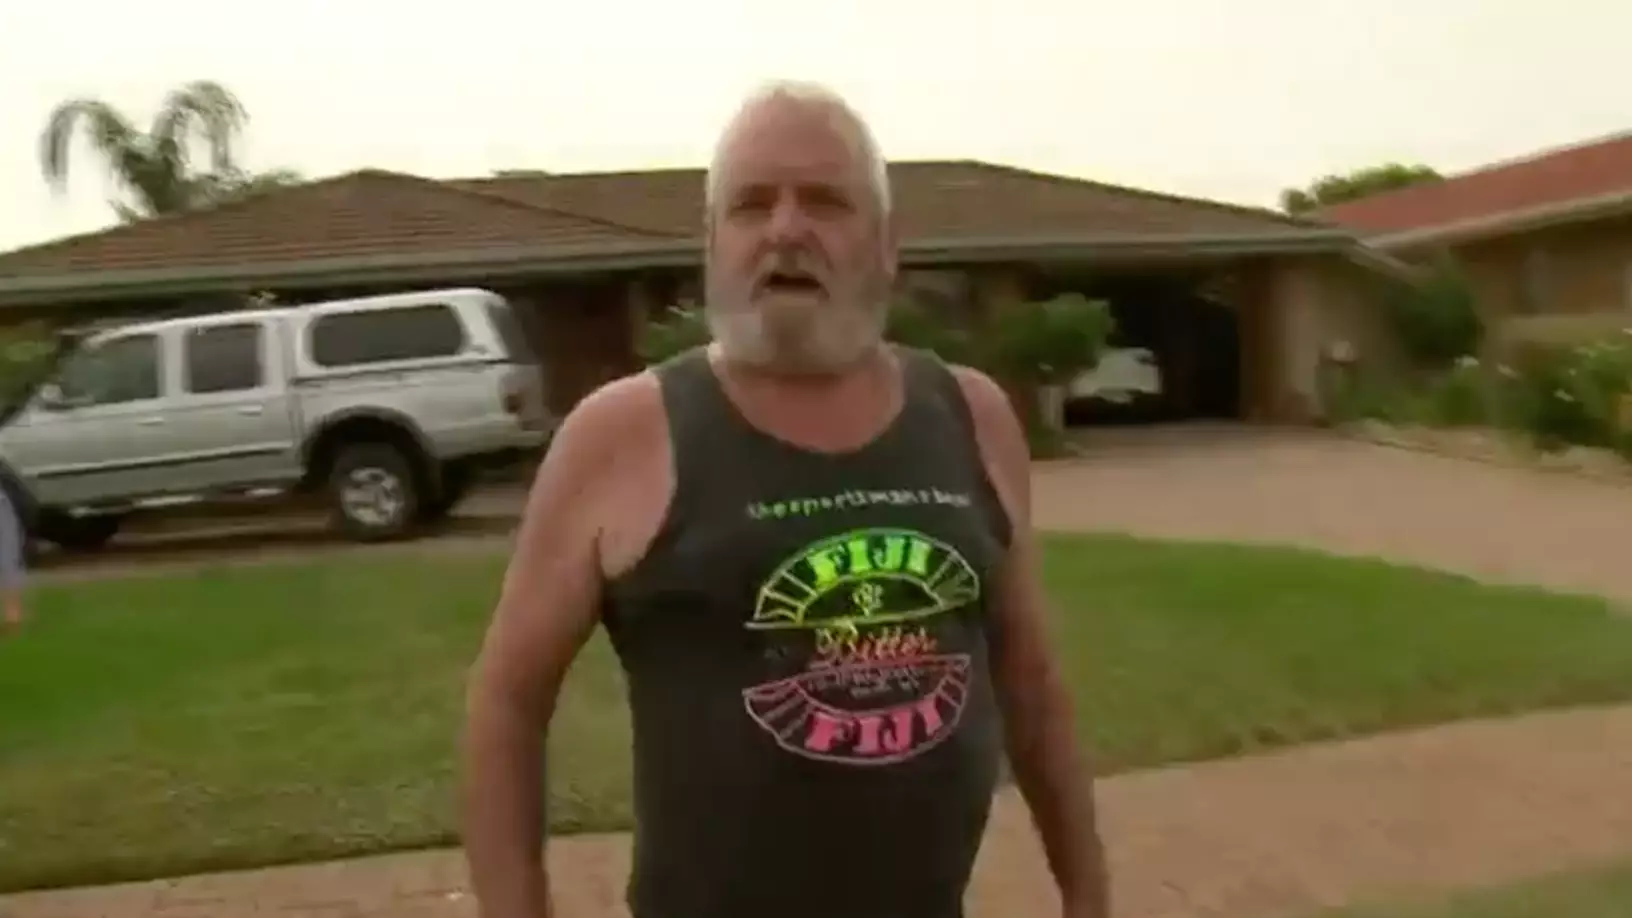 Aussie Man Lashes Out When Questioned Why He Flies Nazi Flag Above Home